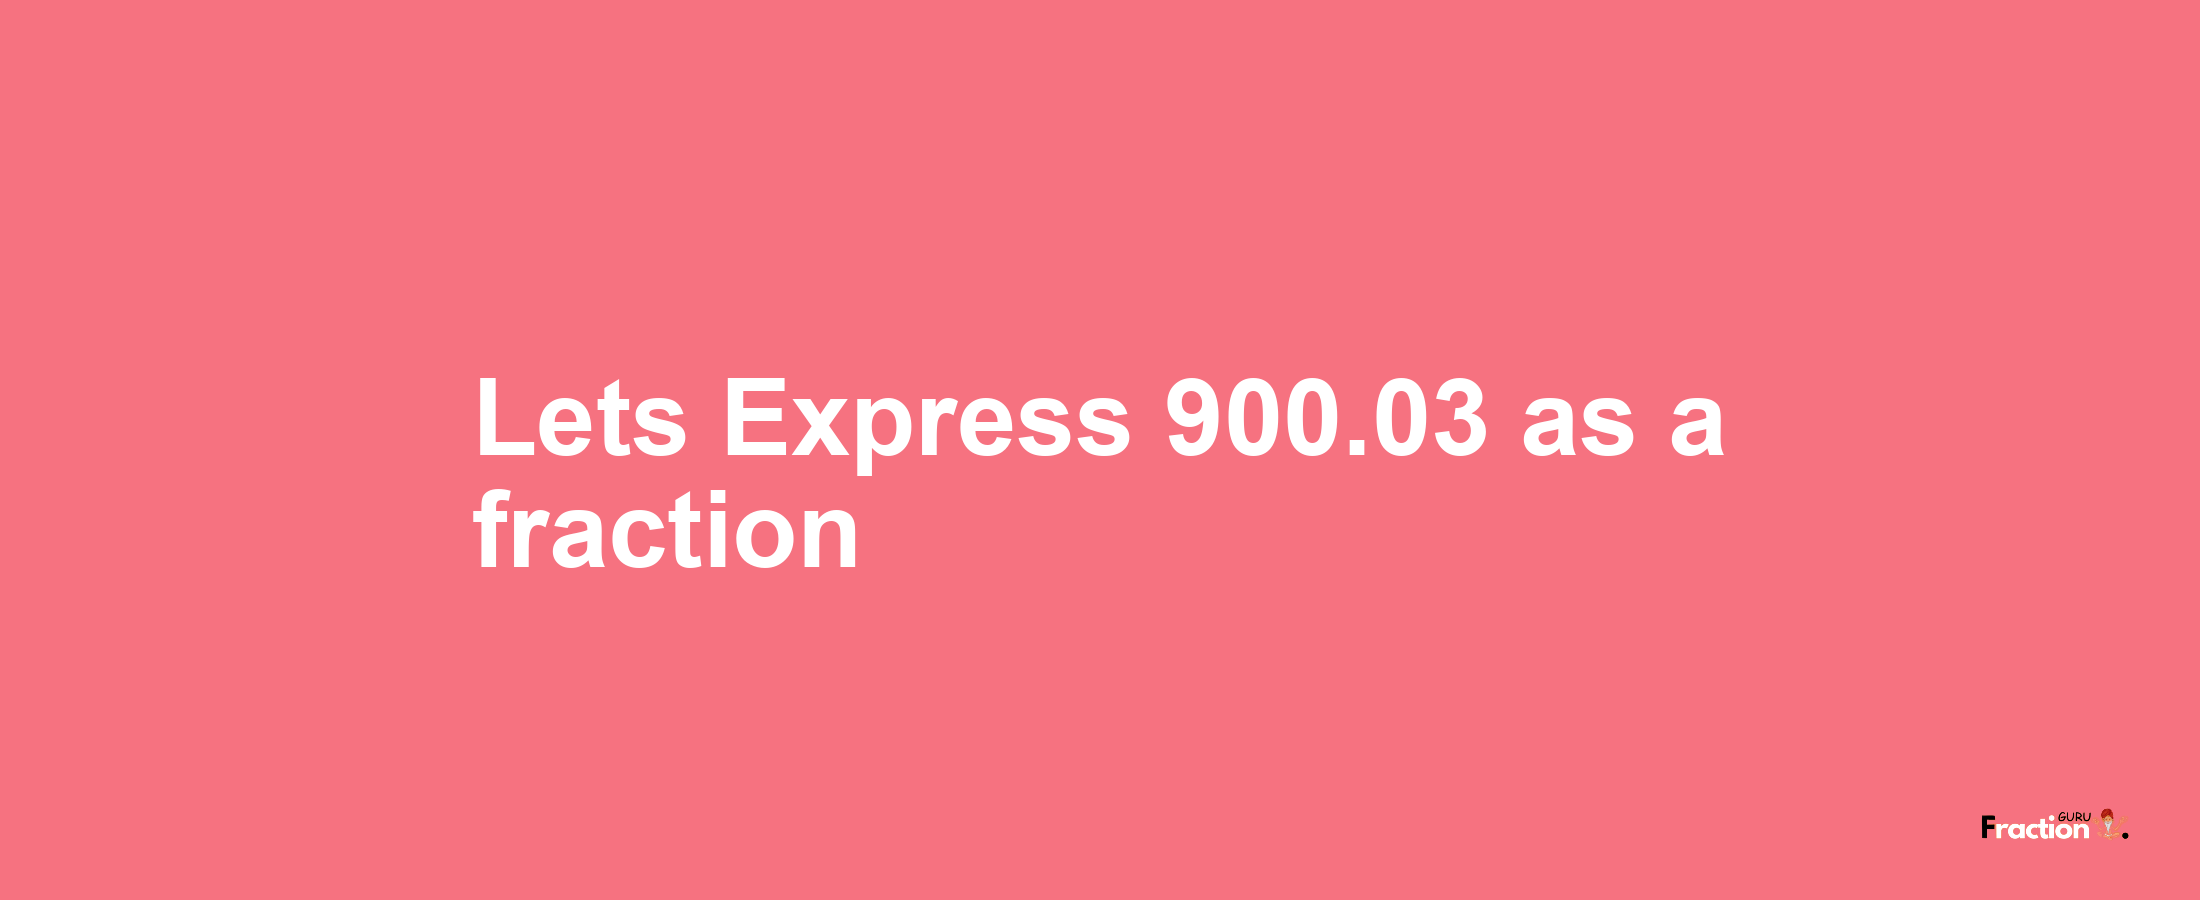 Lets Express 900.03 as afraction